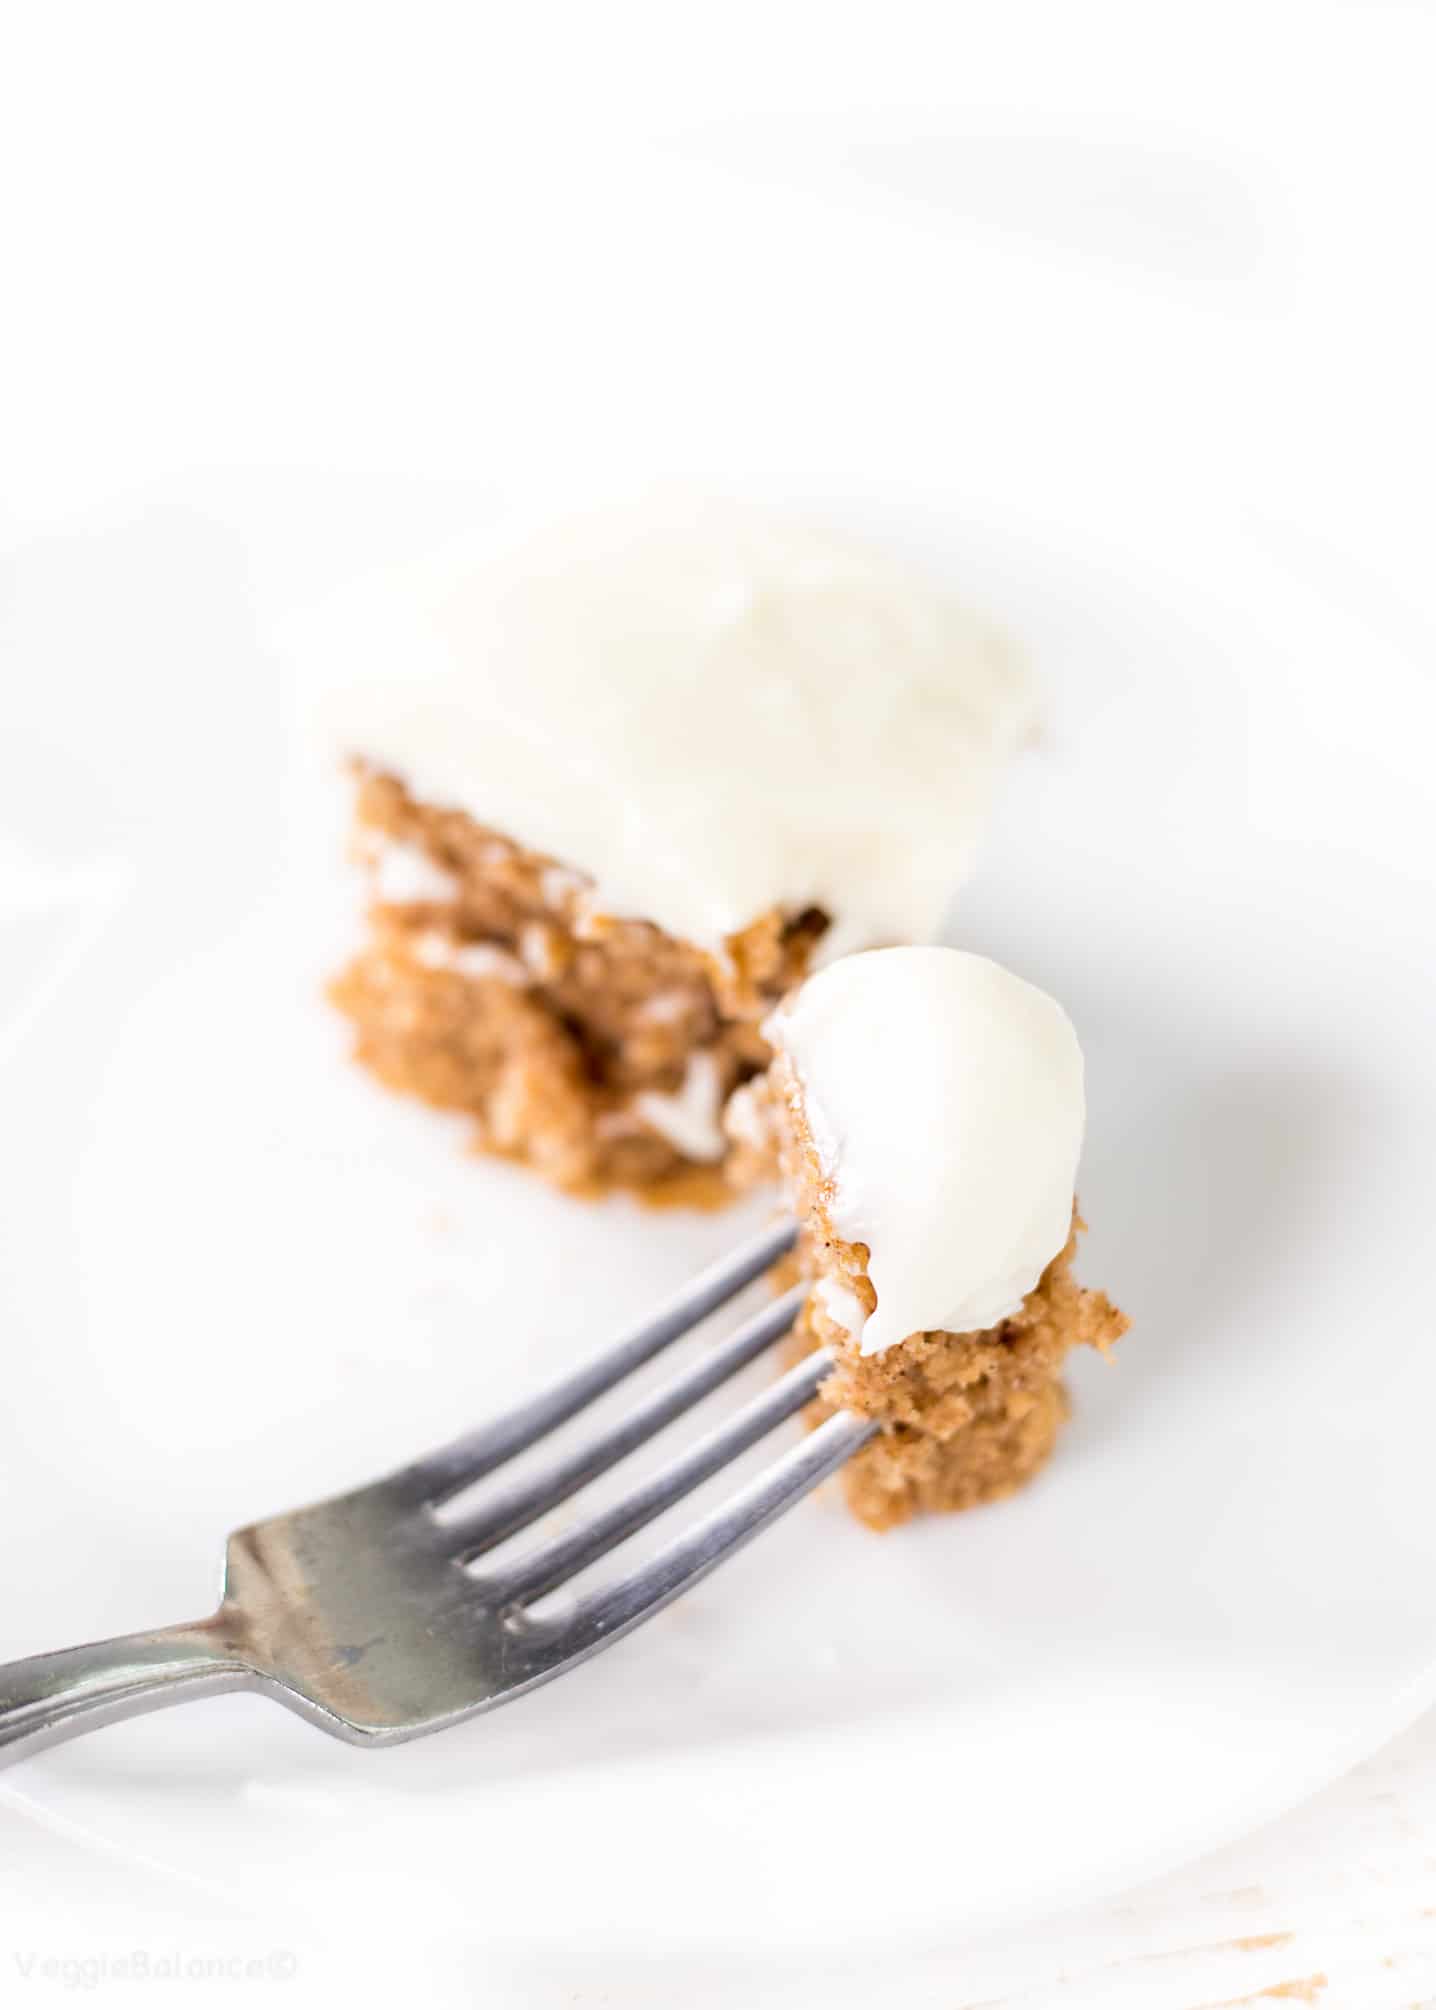 Applesauce Spice Cake with Cream Cheese Frosting Recipe